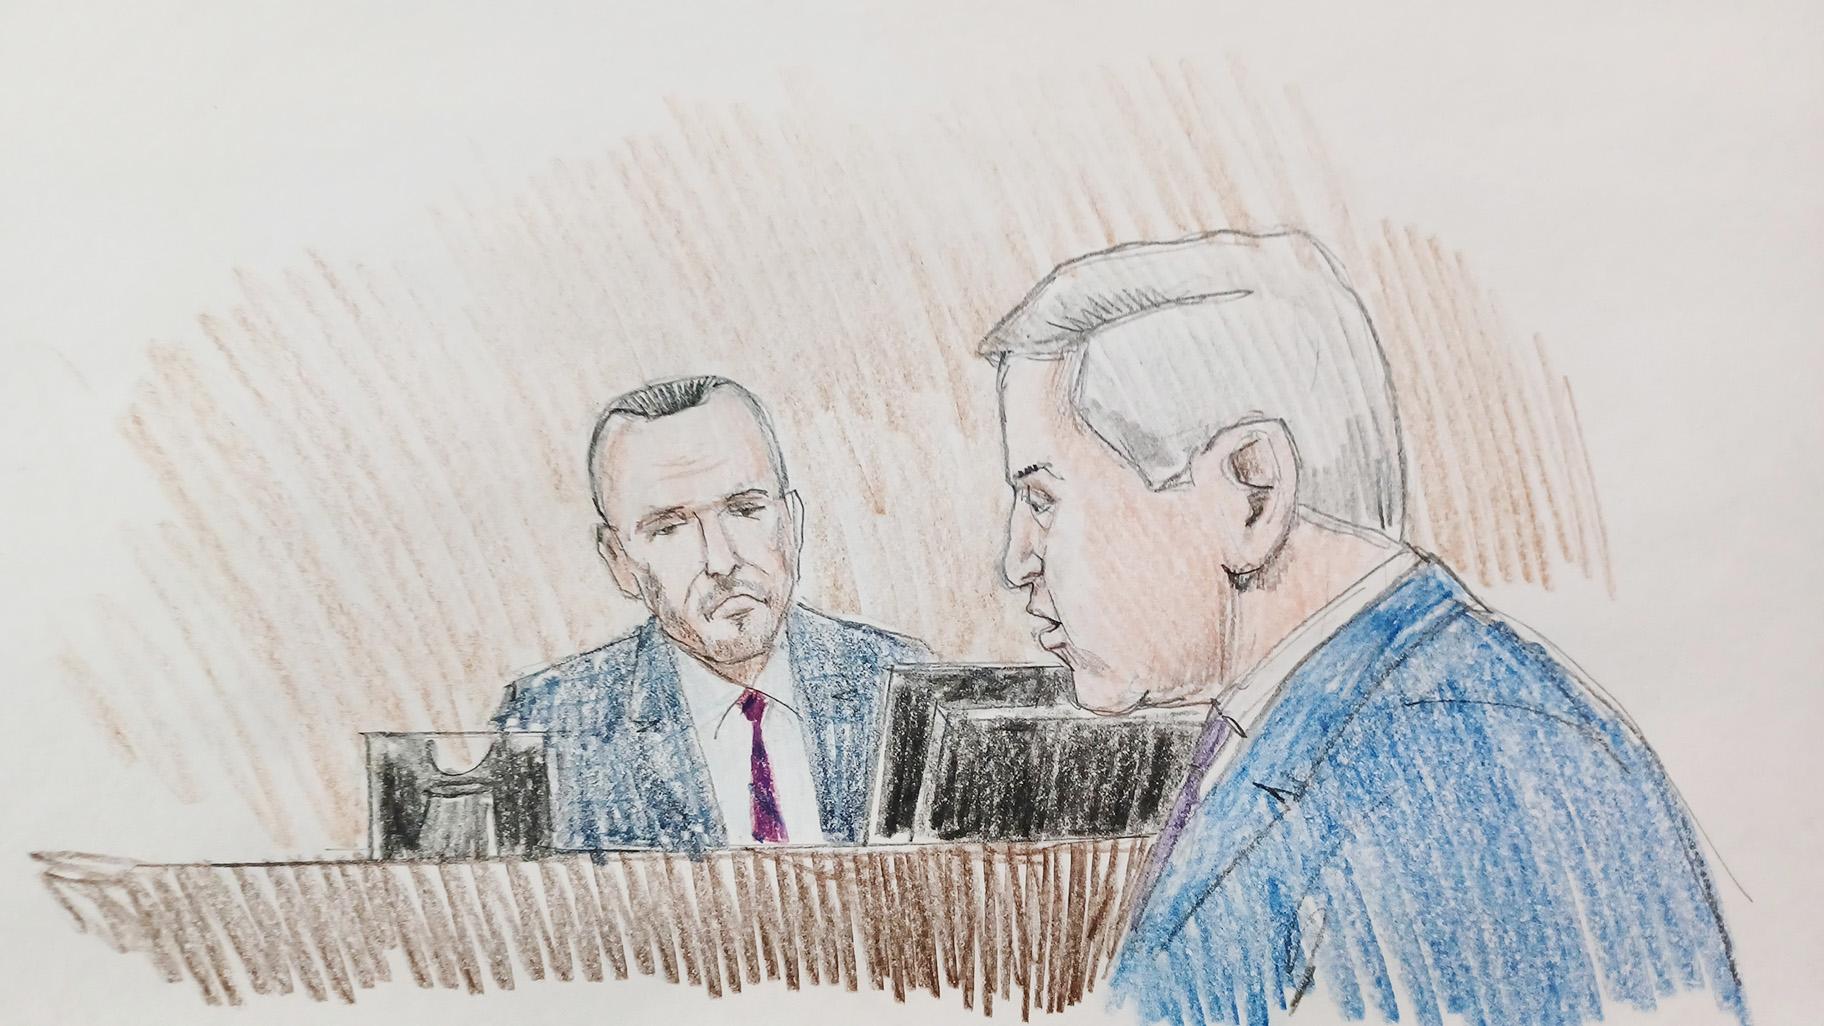 George Reveliotis, who handled property tax appeals for Charles Cui, is cross-examined by Tinos Diamantatos, the attorney representing Cui on Dec. 11, 2023. (WTTW News)